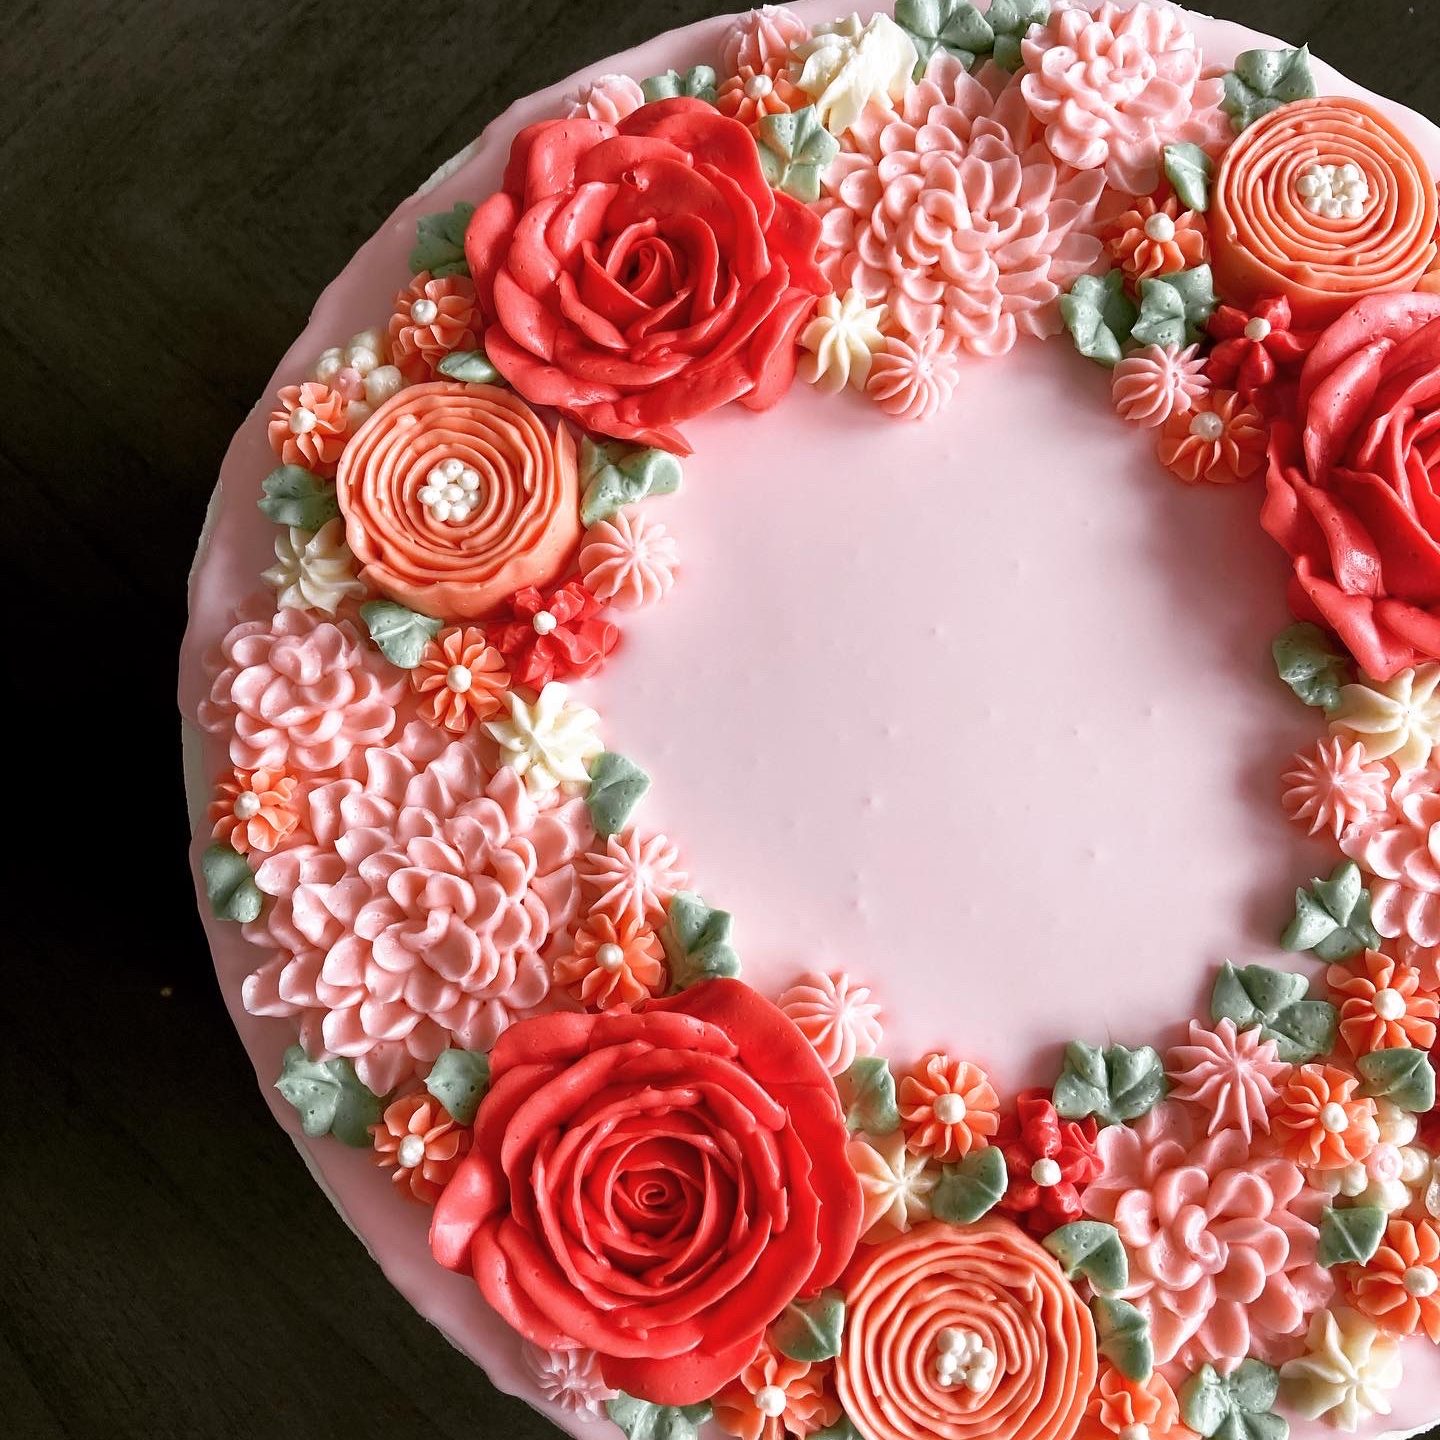 Floral cheery cake